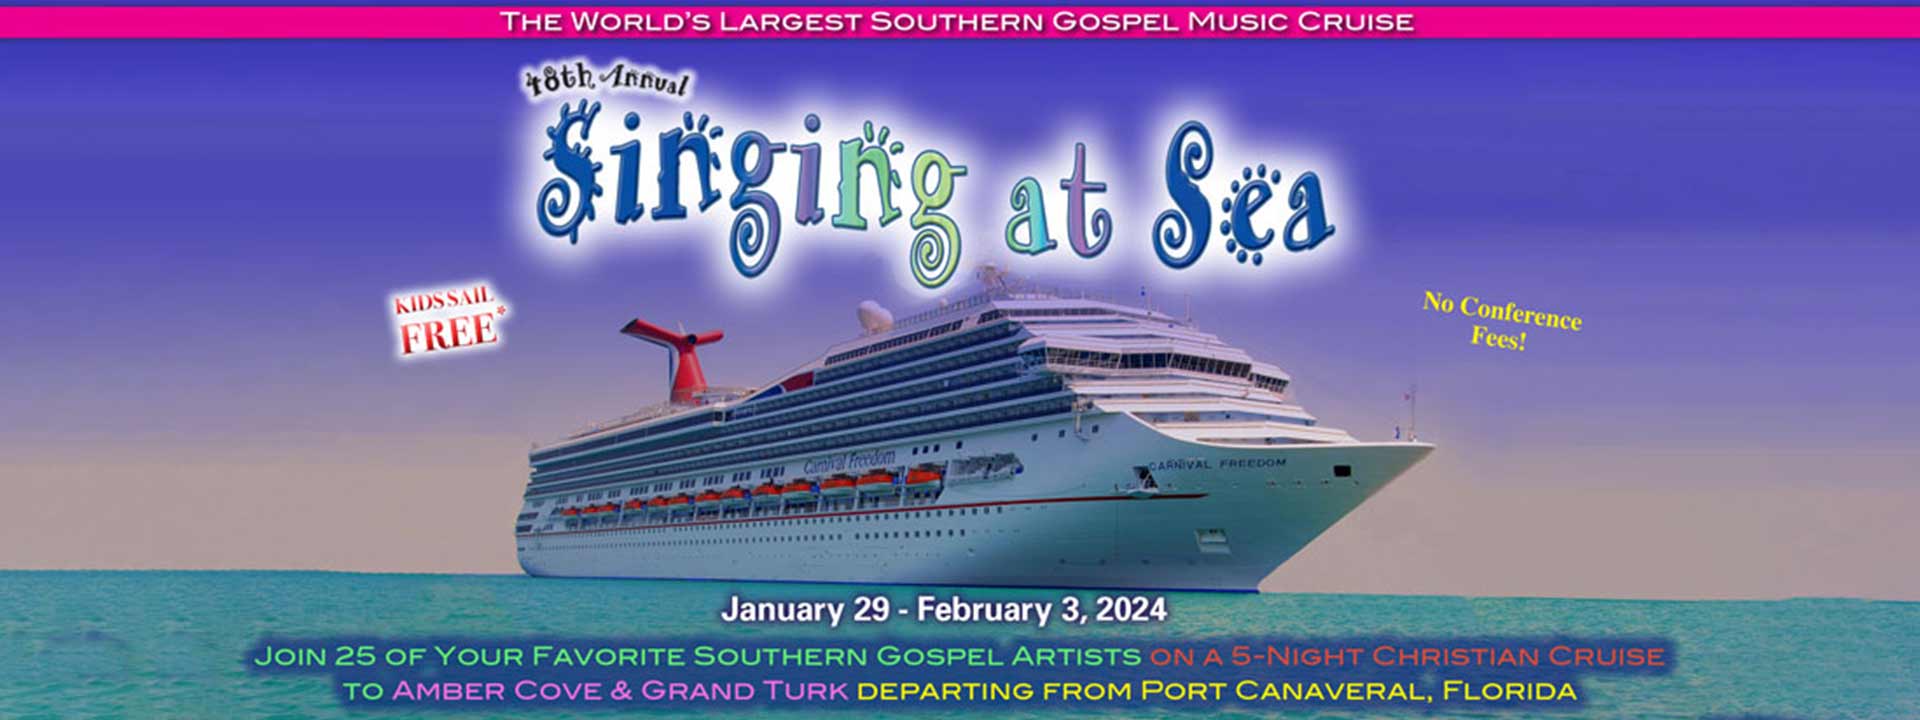 Templeton Tours – 48th Annual Singing at Sea